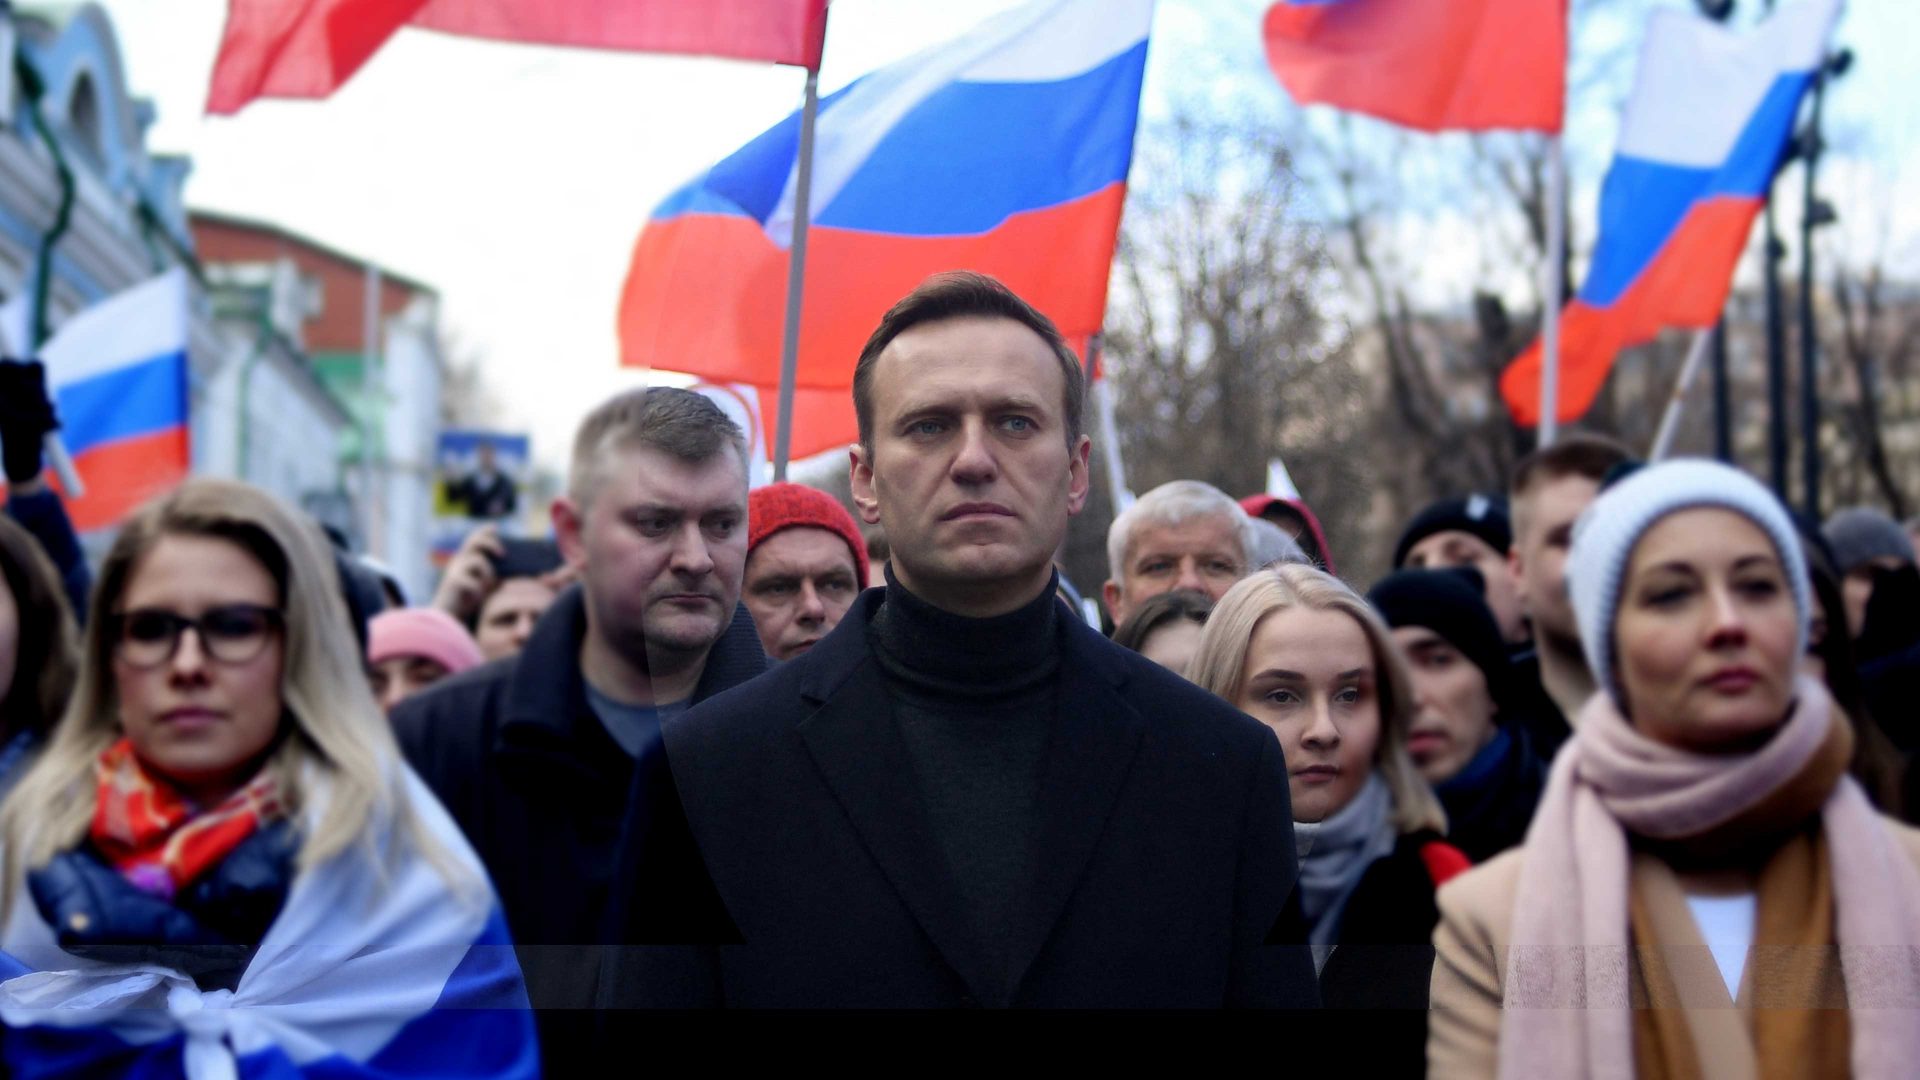 Russian opposition leader Alexei Navalny, his wife Yulia, opposition politician Lyubov Sobol and other demonstrators march in memory of murdered Kremlin critic Boris Nemtsov. Photo: KIRILL KUDRYAVTSEV/AFP via Getty Images